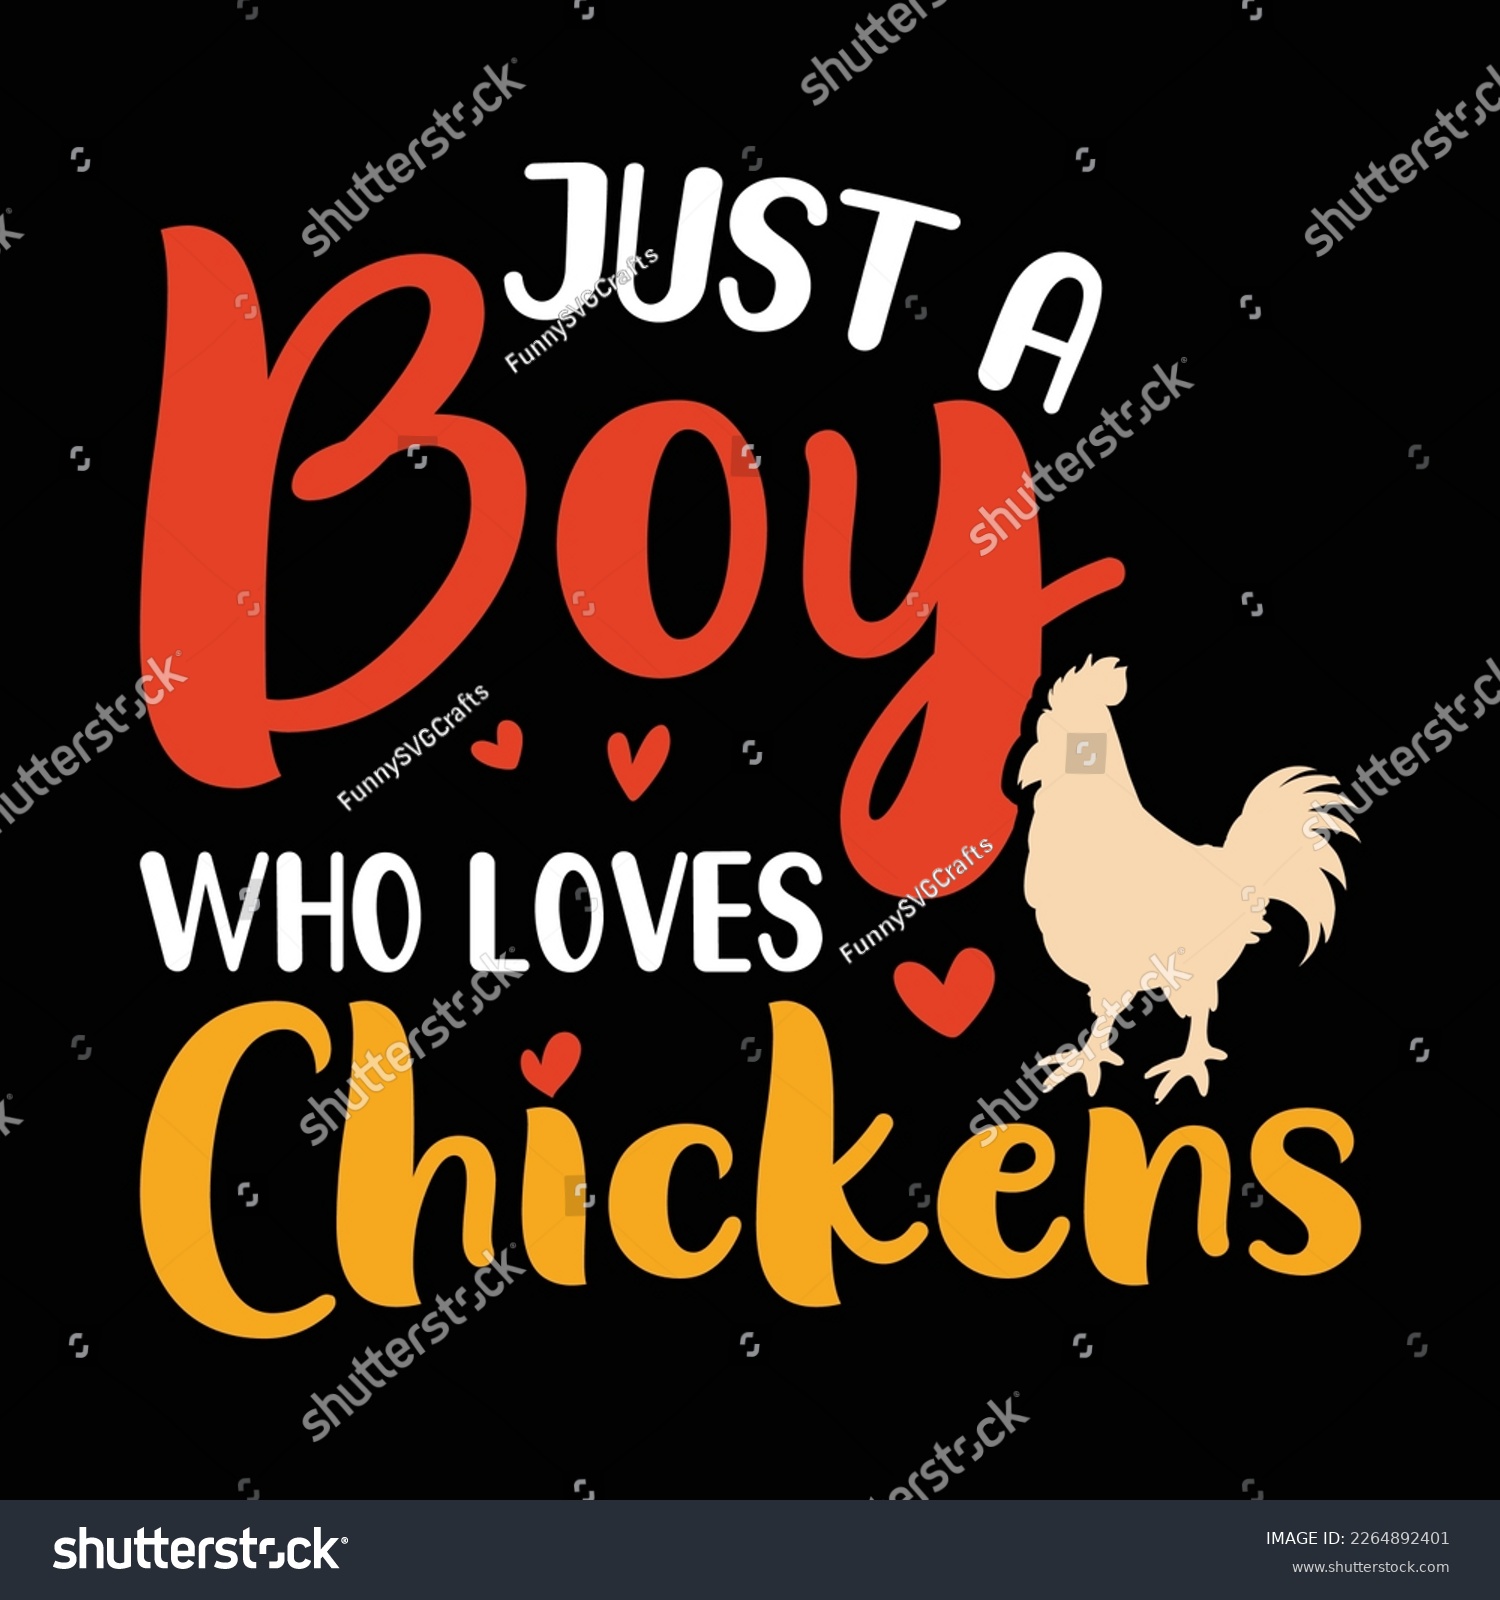 SVG of Just a Boy Who Loves Chickens Shirt, Chicken Lover Shirt, Chicken Shirt, Cow Vector, Cow Vintage, Chickens SVG Shirt Print Template svg